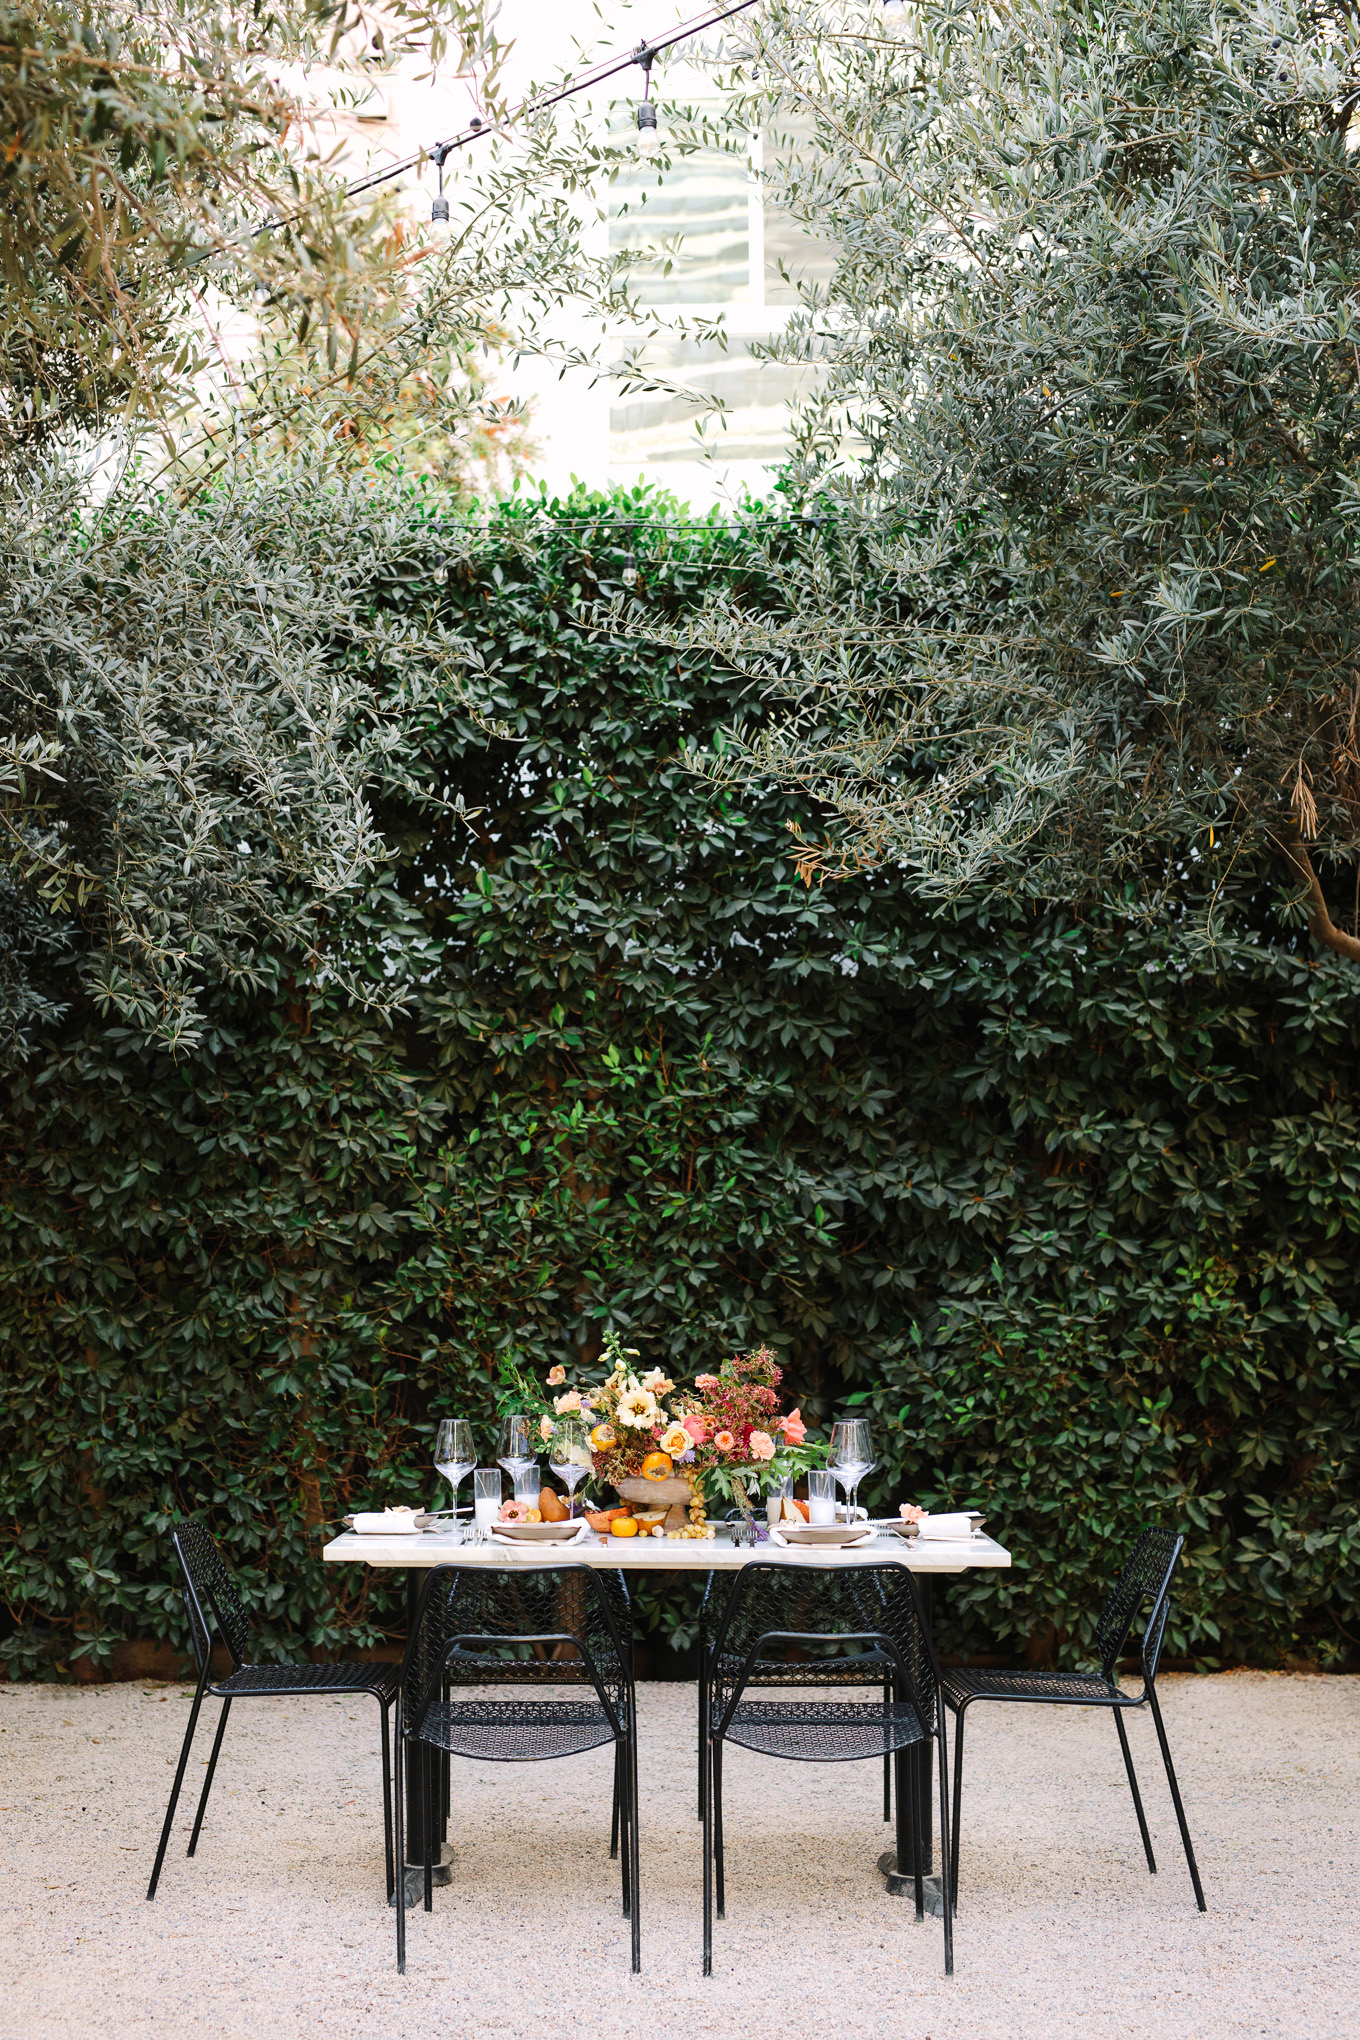 Redbird DTLA garden table inspo | Best Southern California Garden Wedding Venues | Colorful and elevated wedding photography for fun-loving couples | #gardenvenue #weddingvenue #socalweddingvenue #bouquetideas #uniquebouquet   Source: Mary Costa Photography | Los Angeles 